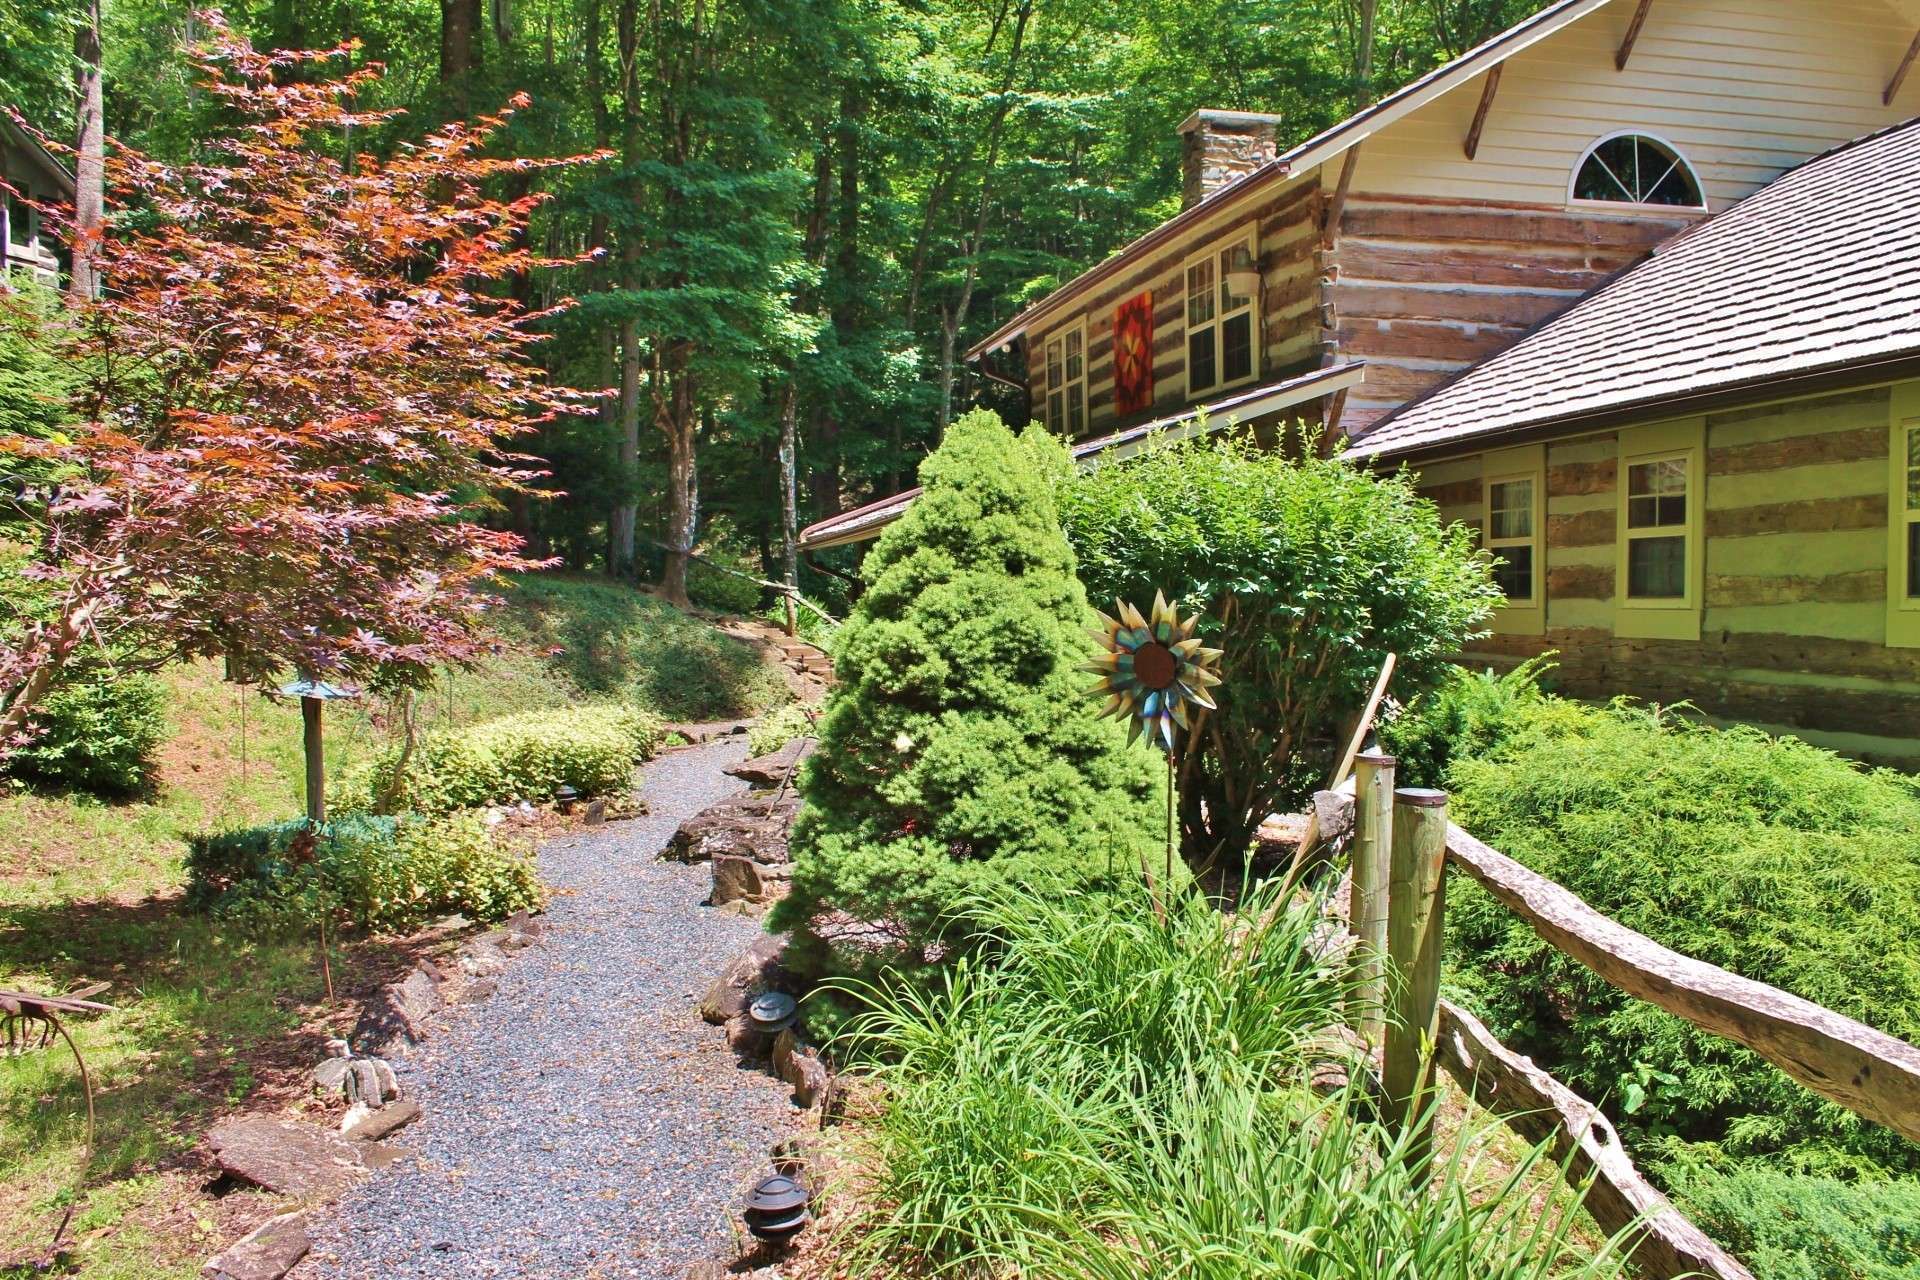 A professionally landscaped walkway leads you to the rocking chair front porch. Both the landscaping and porch enhances the rustic charm of the cabin.